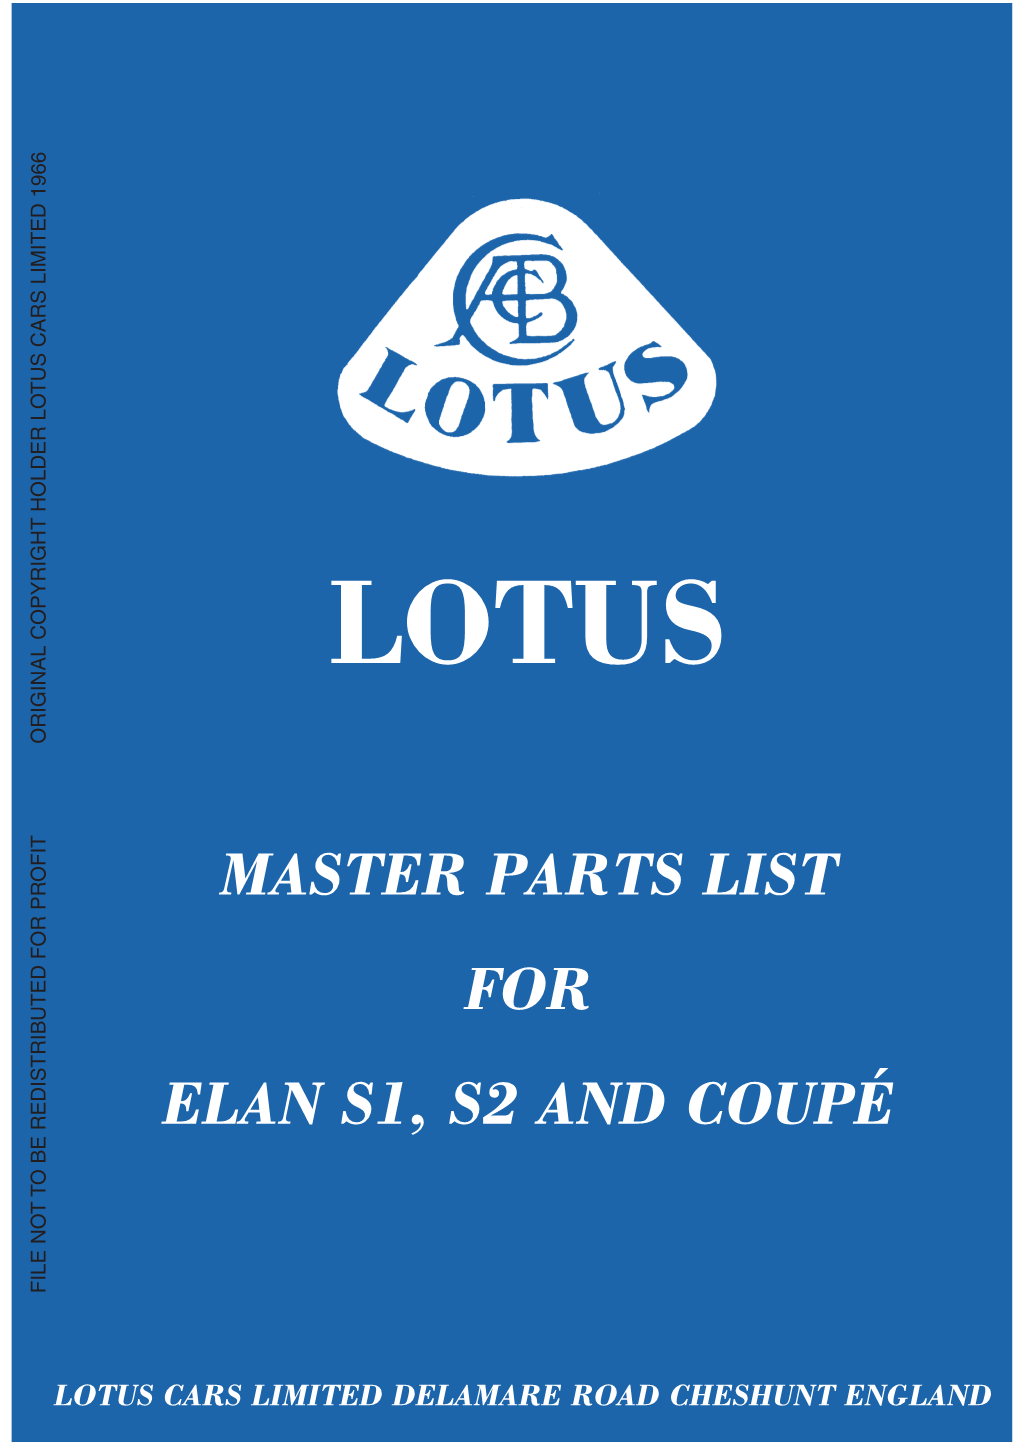 Lotus Master Parts List Elan S1, S2 and Coupe